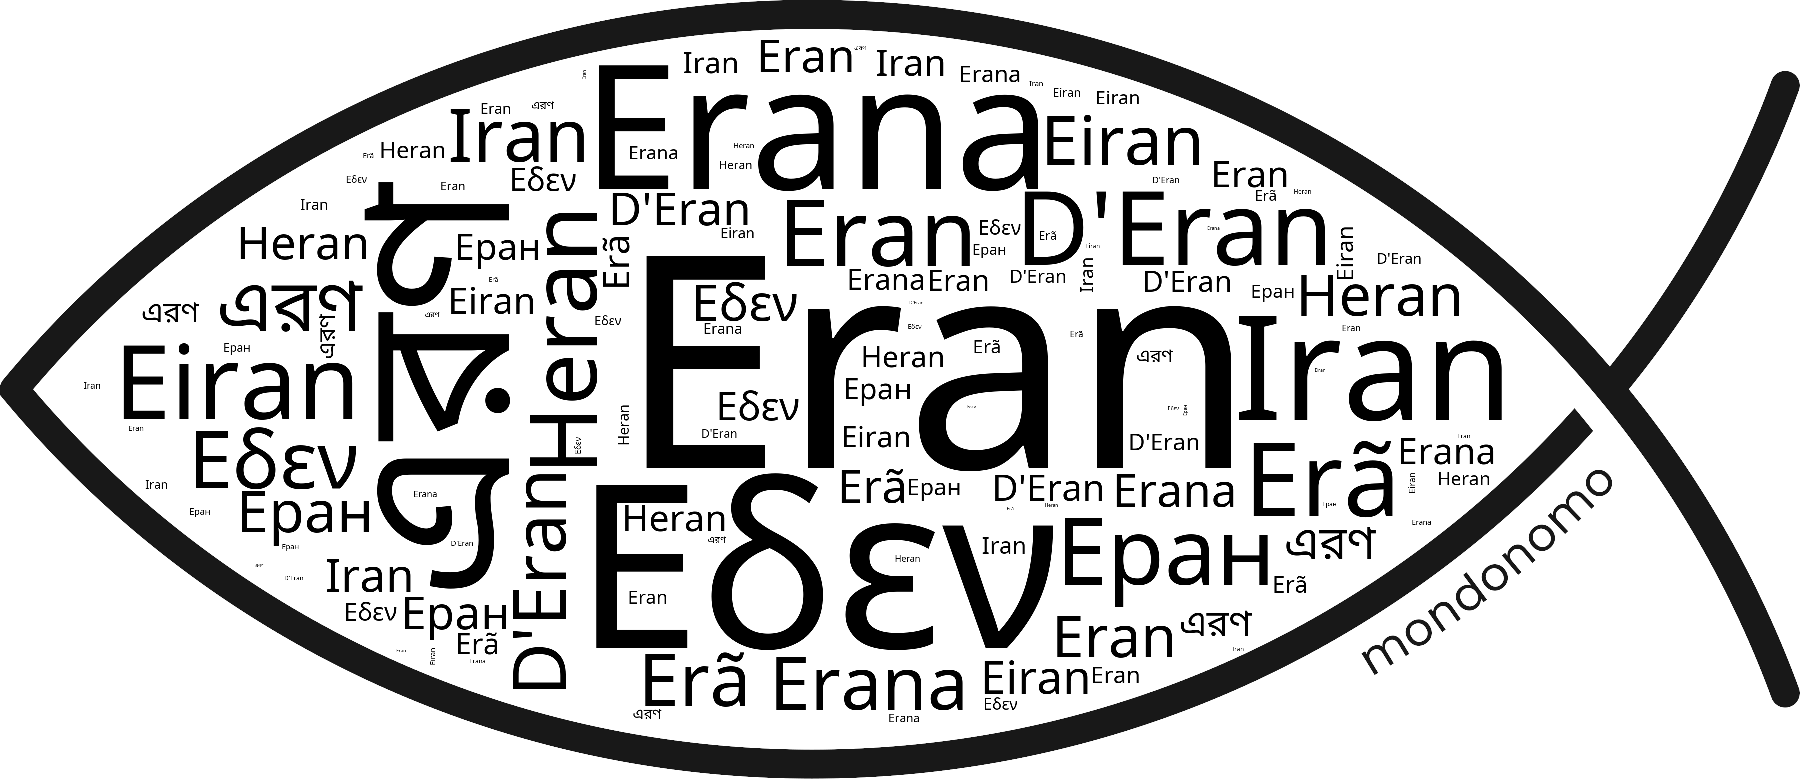 Name Eran in the world's Bibles